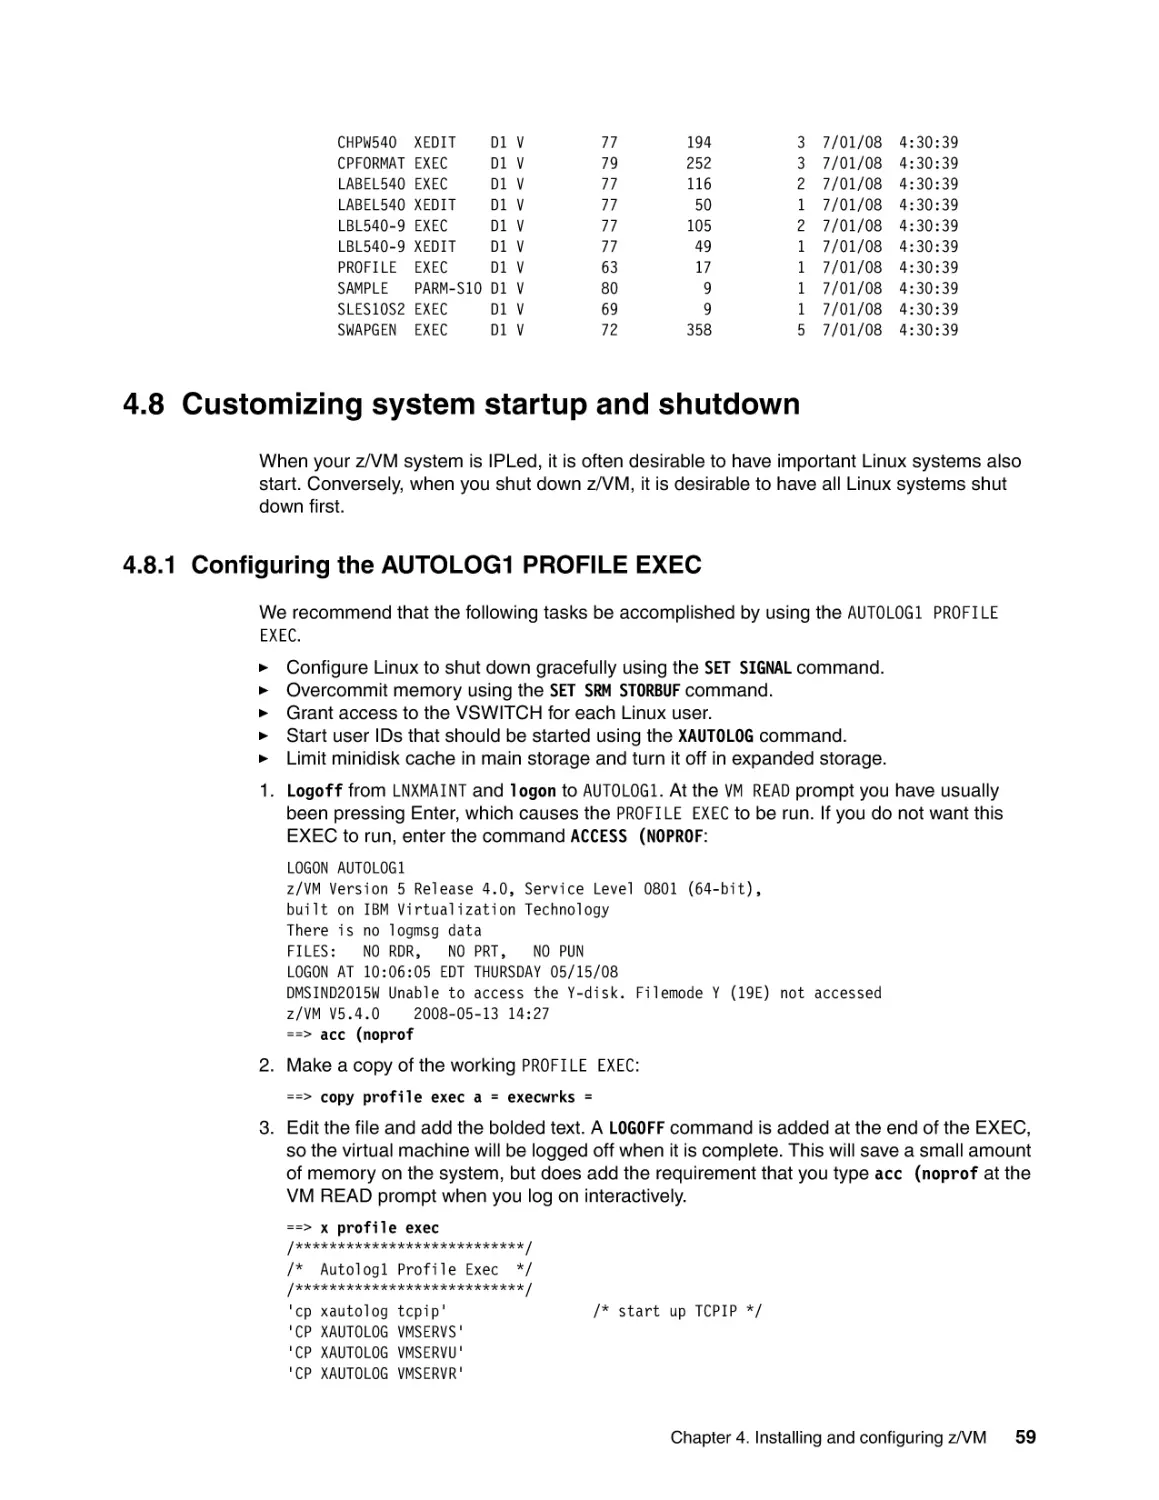 4.8 Customizing system startup and shutdown
4.8.1 Configuring the AUTOLOG1 PROFILE EXEC